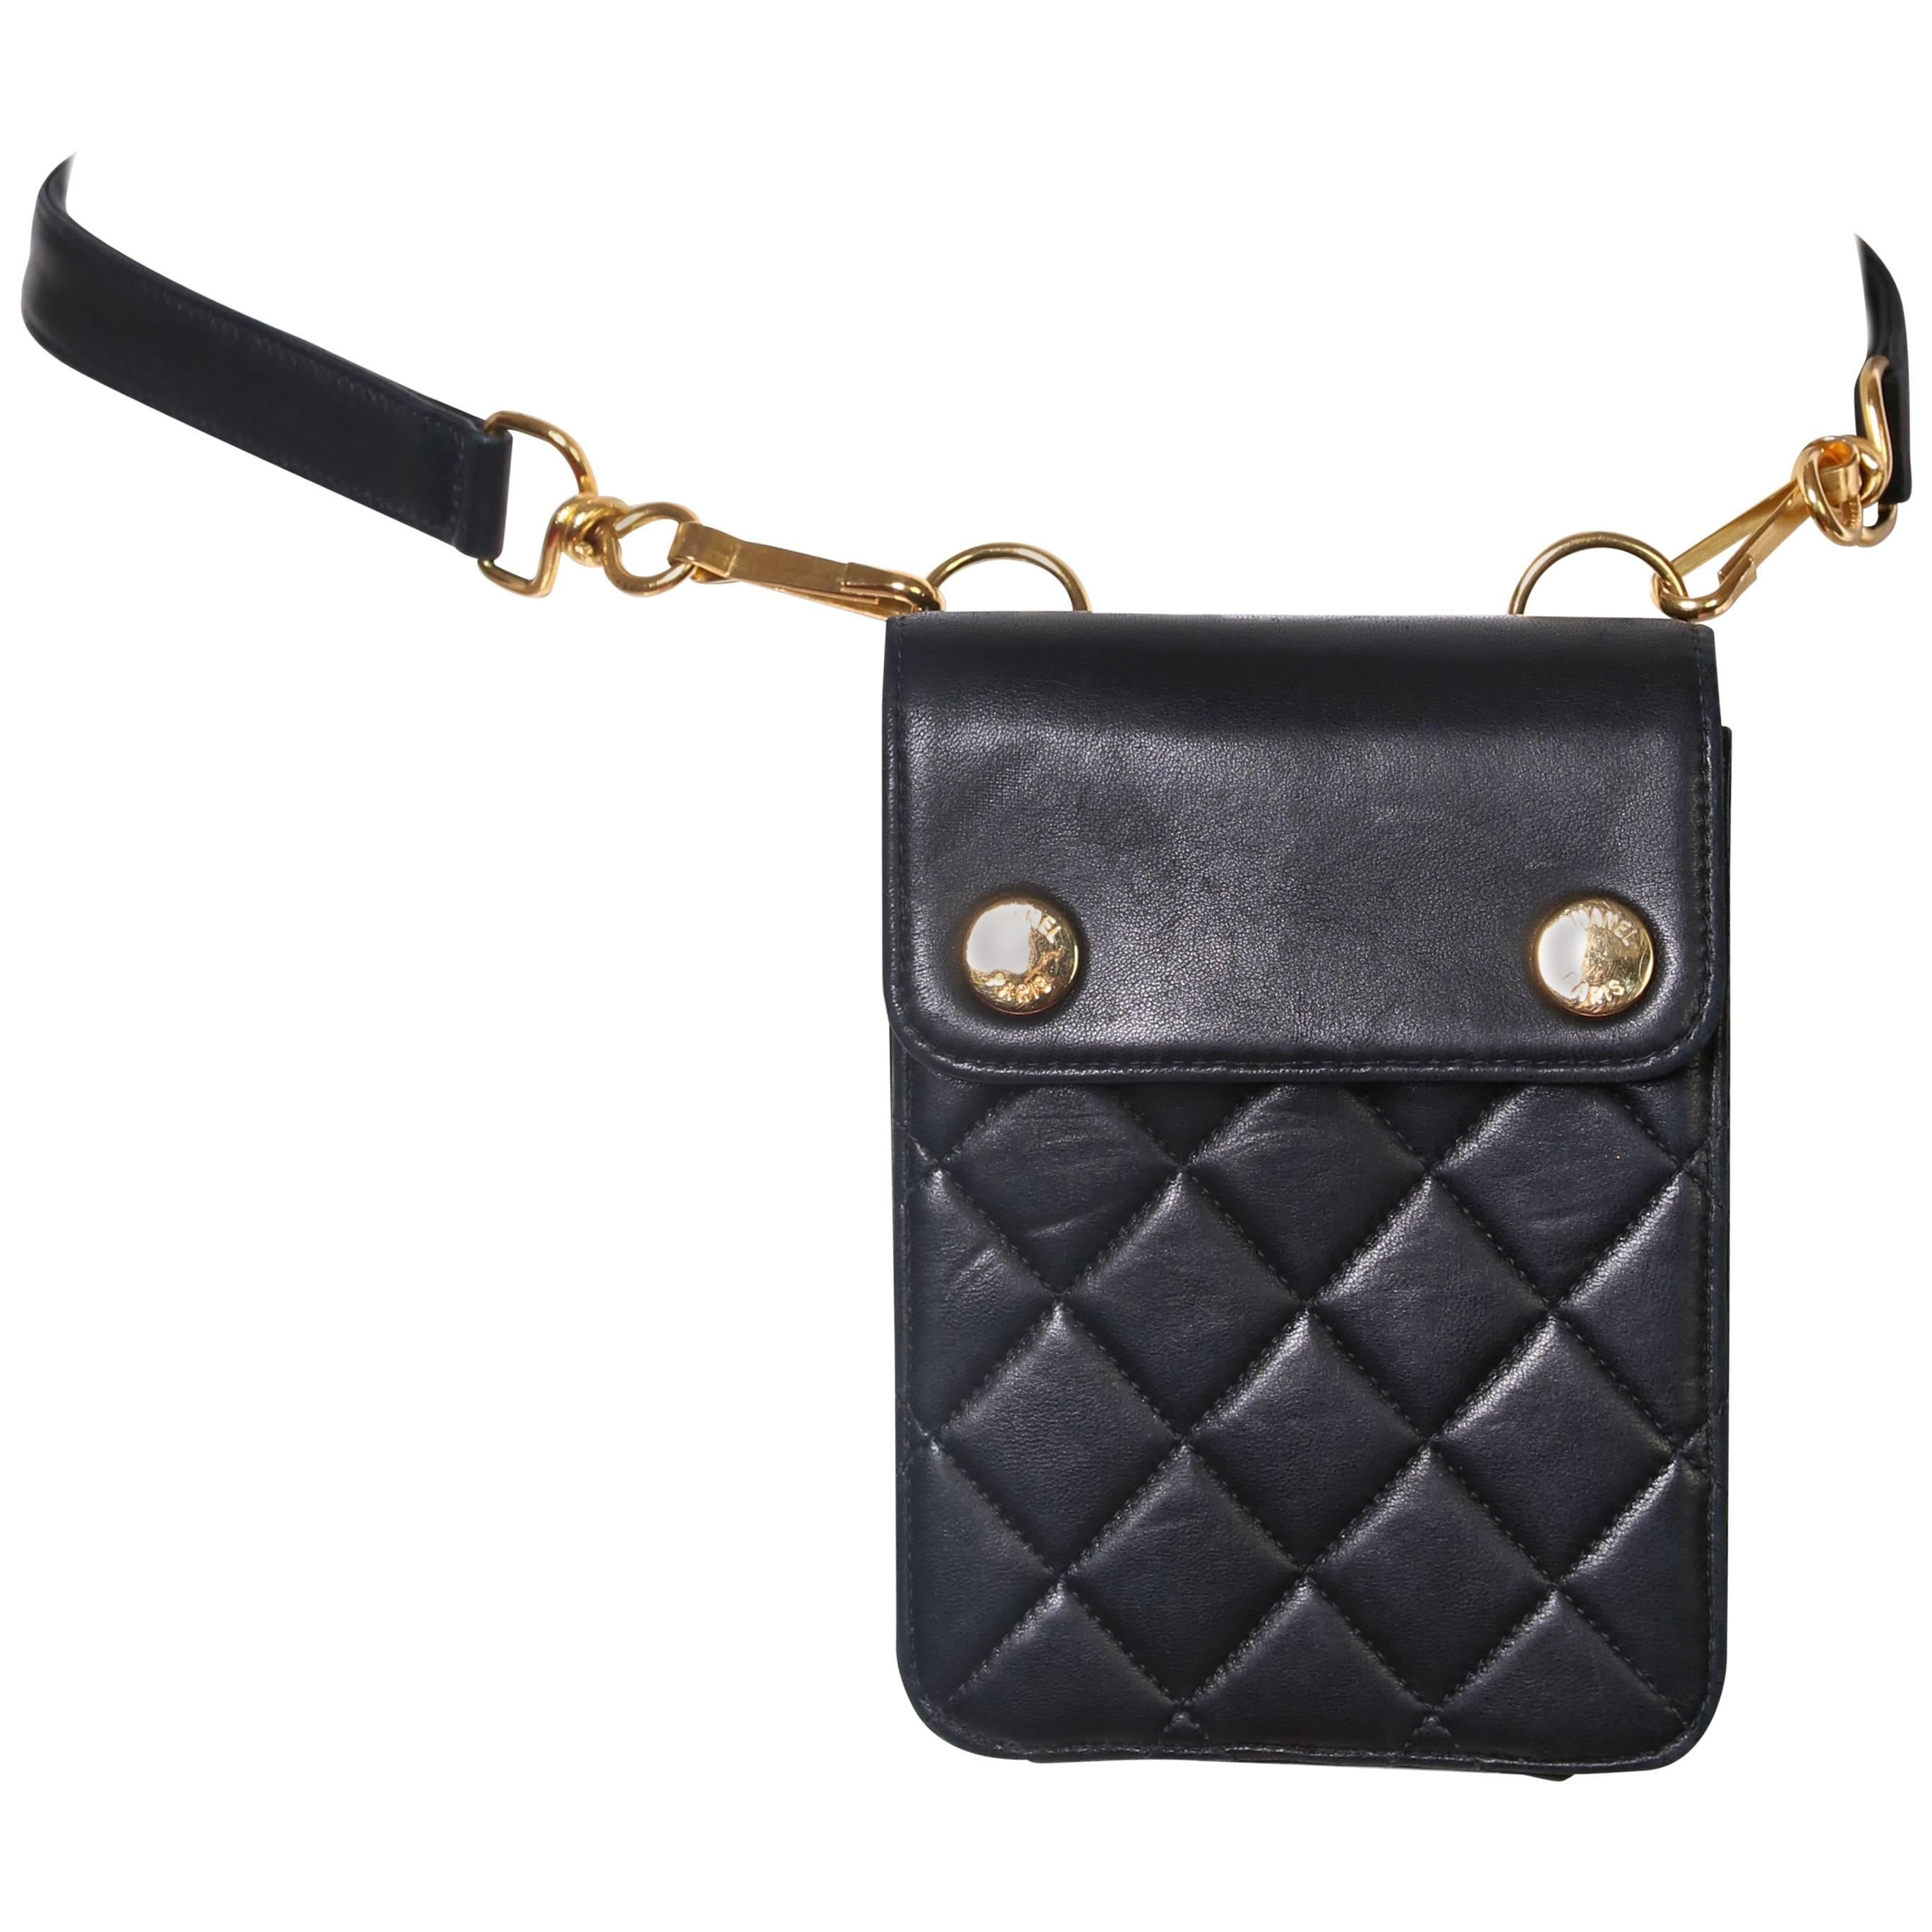 Ca. 1996 Chanel Black Quilted Leather Waist Bag W/Gold Hardware